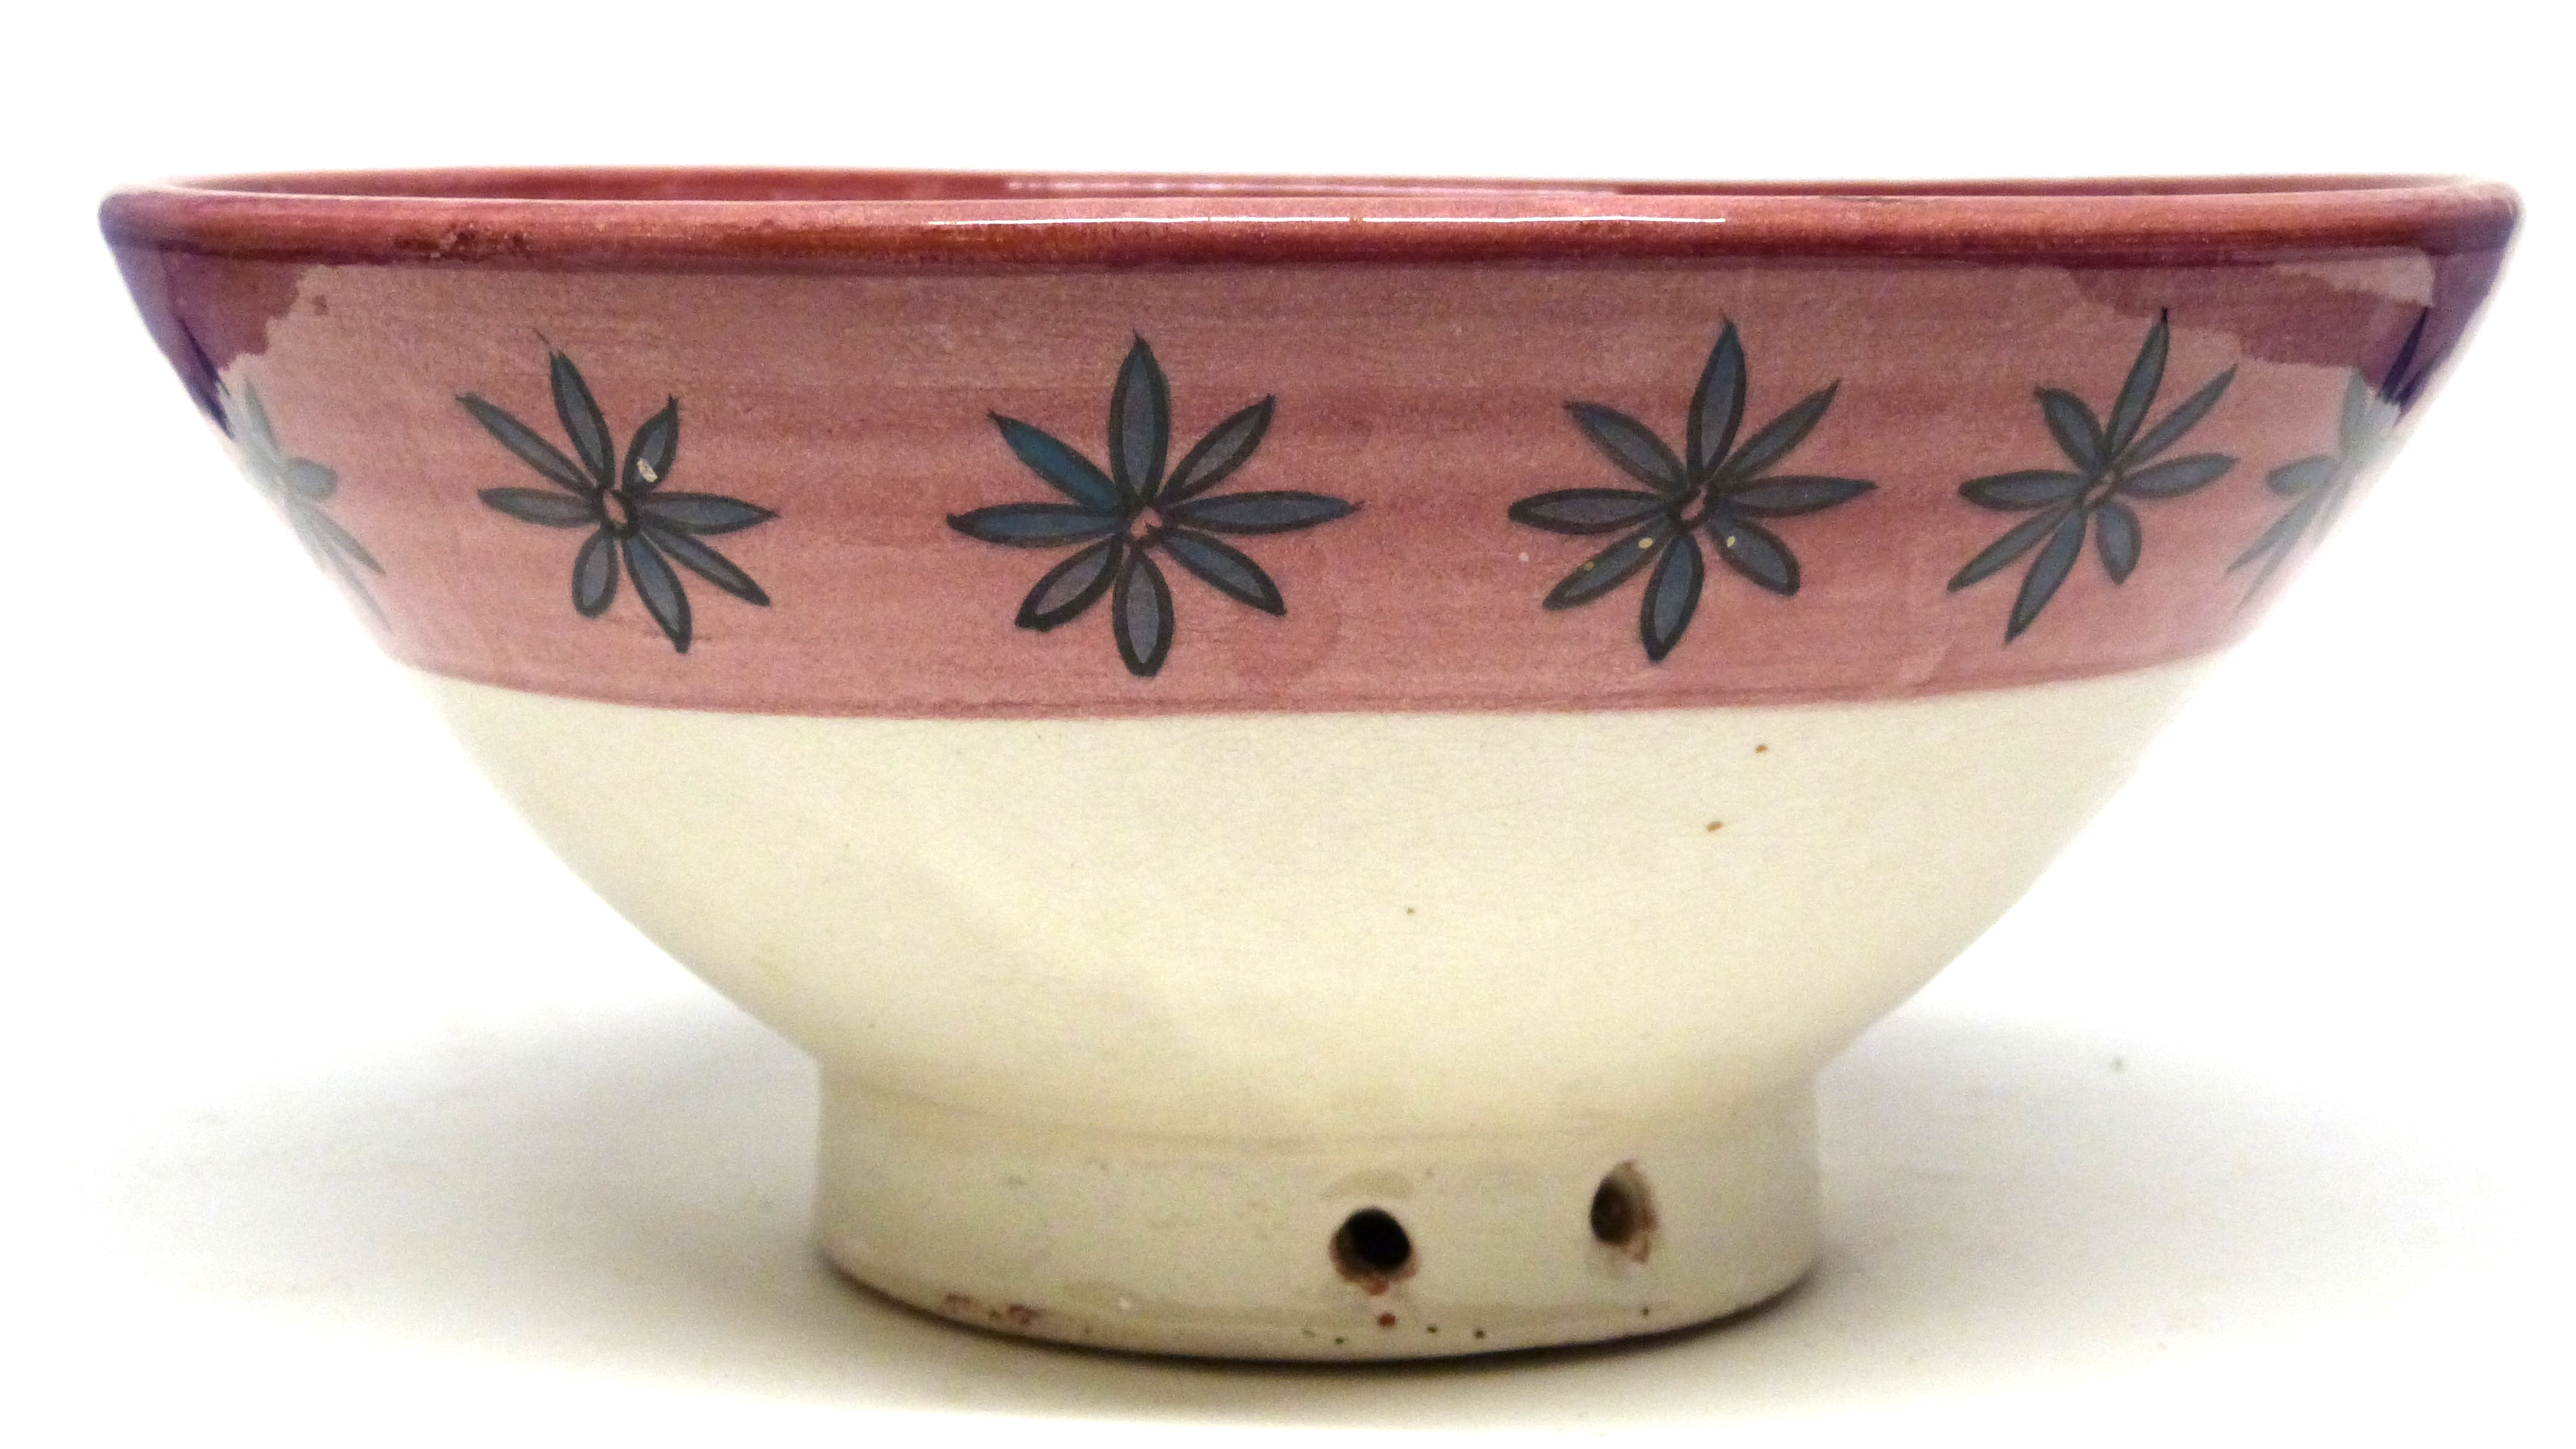 Safi Middle Eastern bowl, the interior with a red glazed star design, 26cm diam - Image 2 of 2